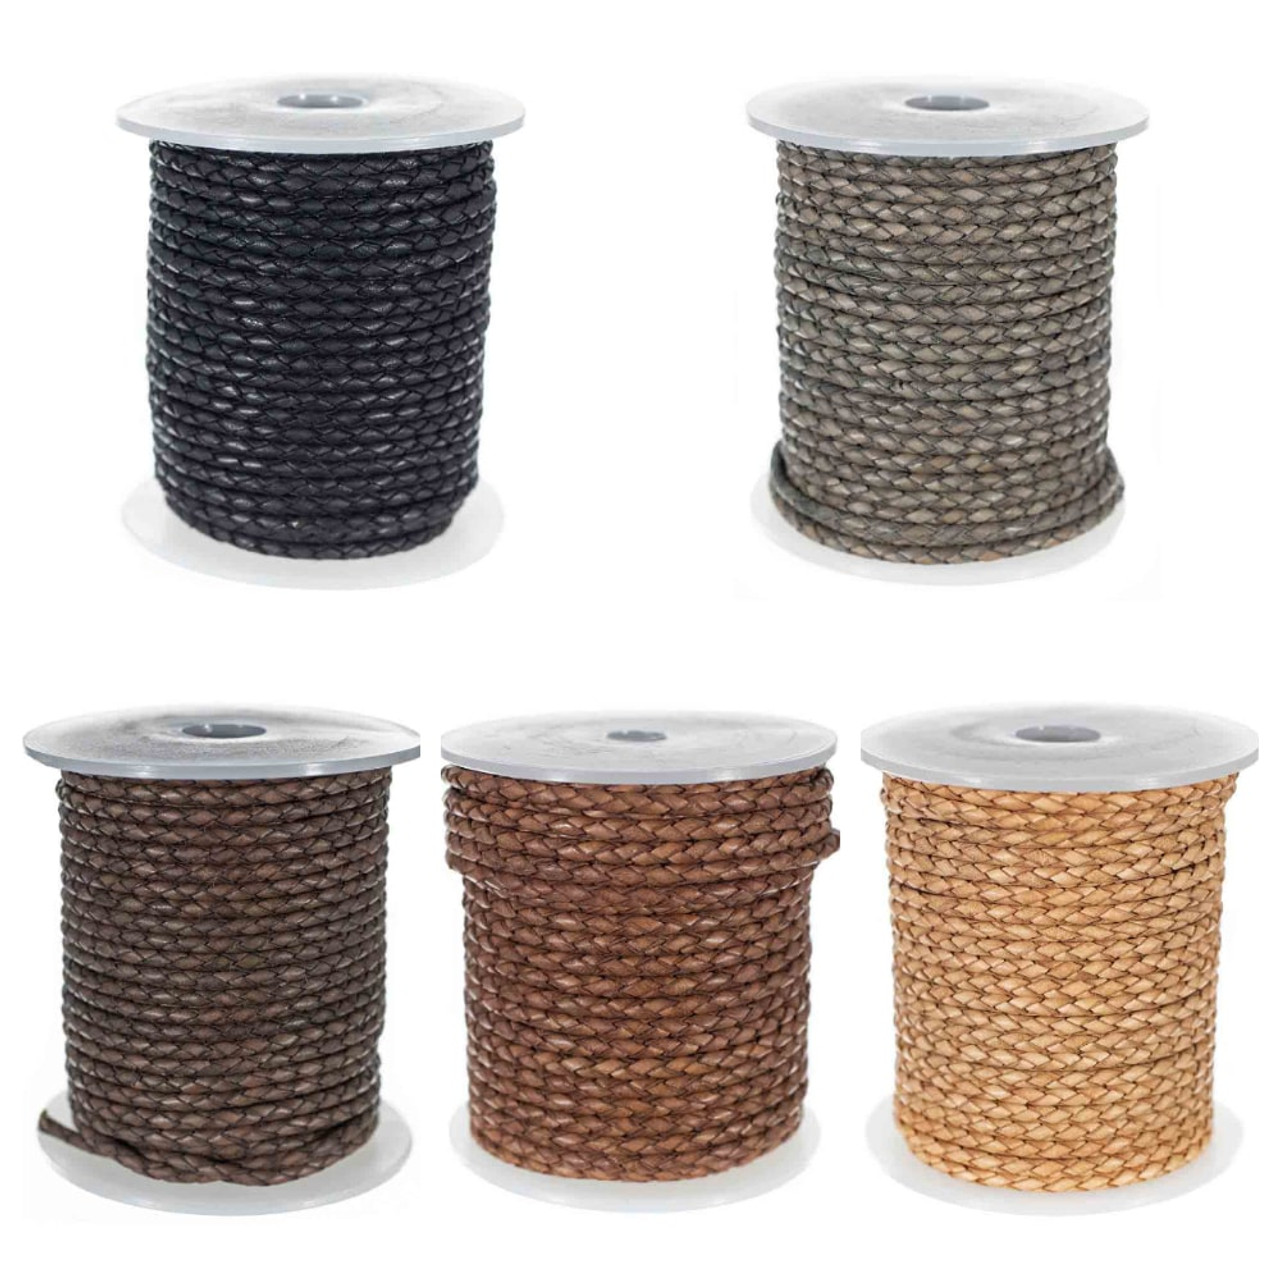 Paracord Planet Round Leather Cord - 3mm to 6mm Sizes